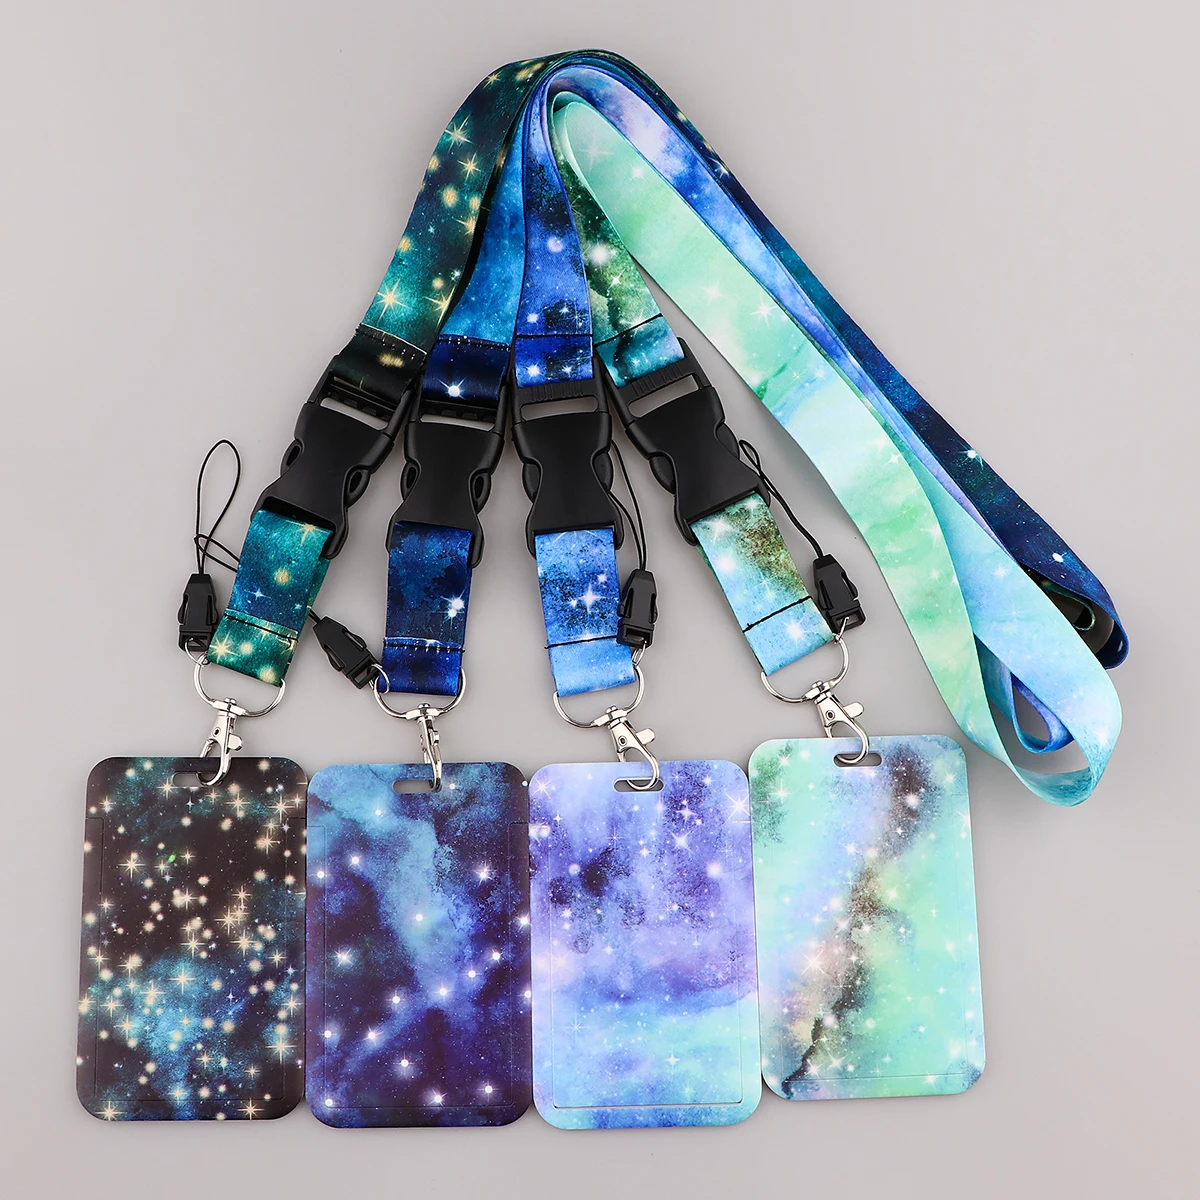 

Van Gogh Art Starry Sky Vintage Cell phone Lanyard Key ring Sling Badge Neckband Keychain Badge ID Cell Phone Rope Neck Straps